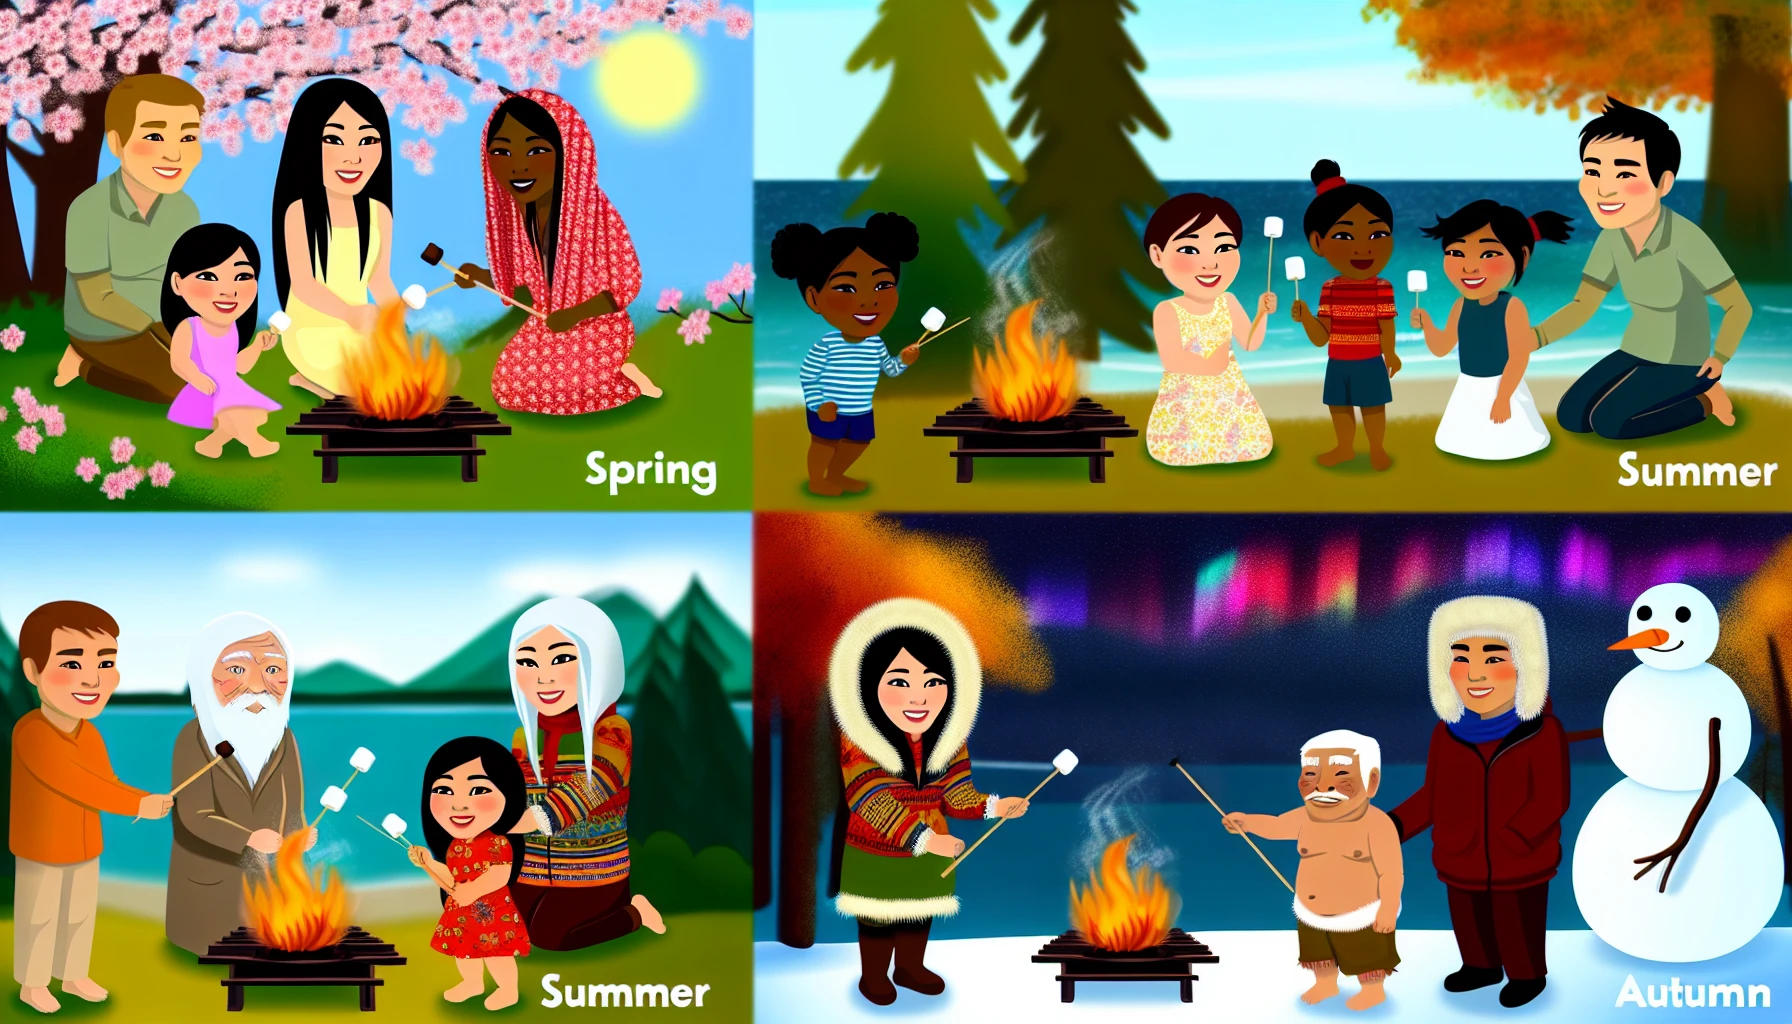 K Fire Throughout the Four Seasons